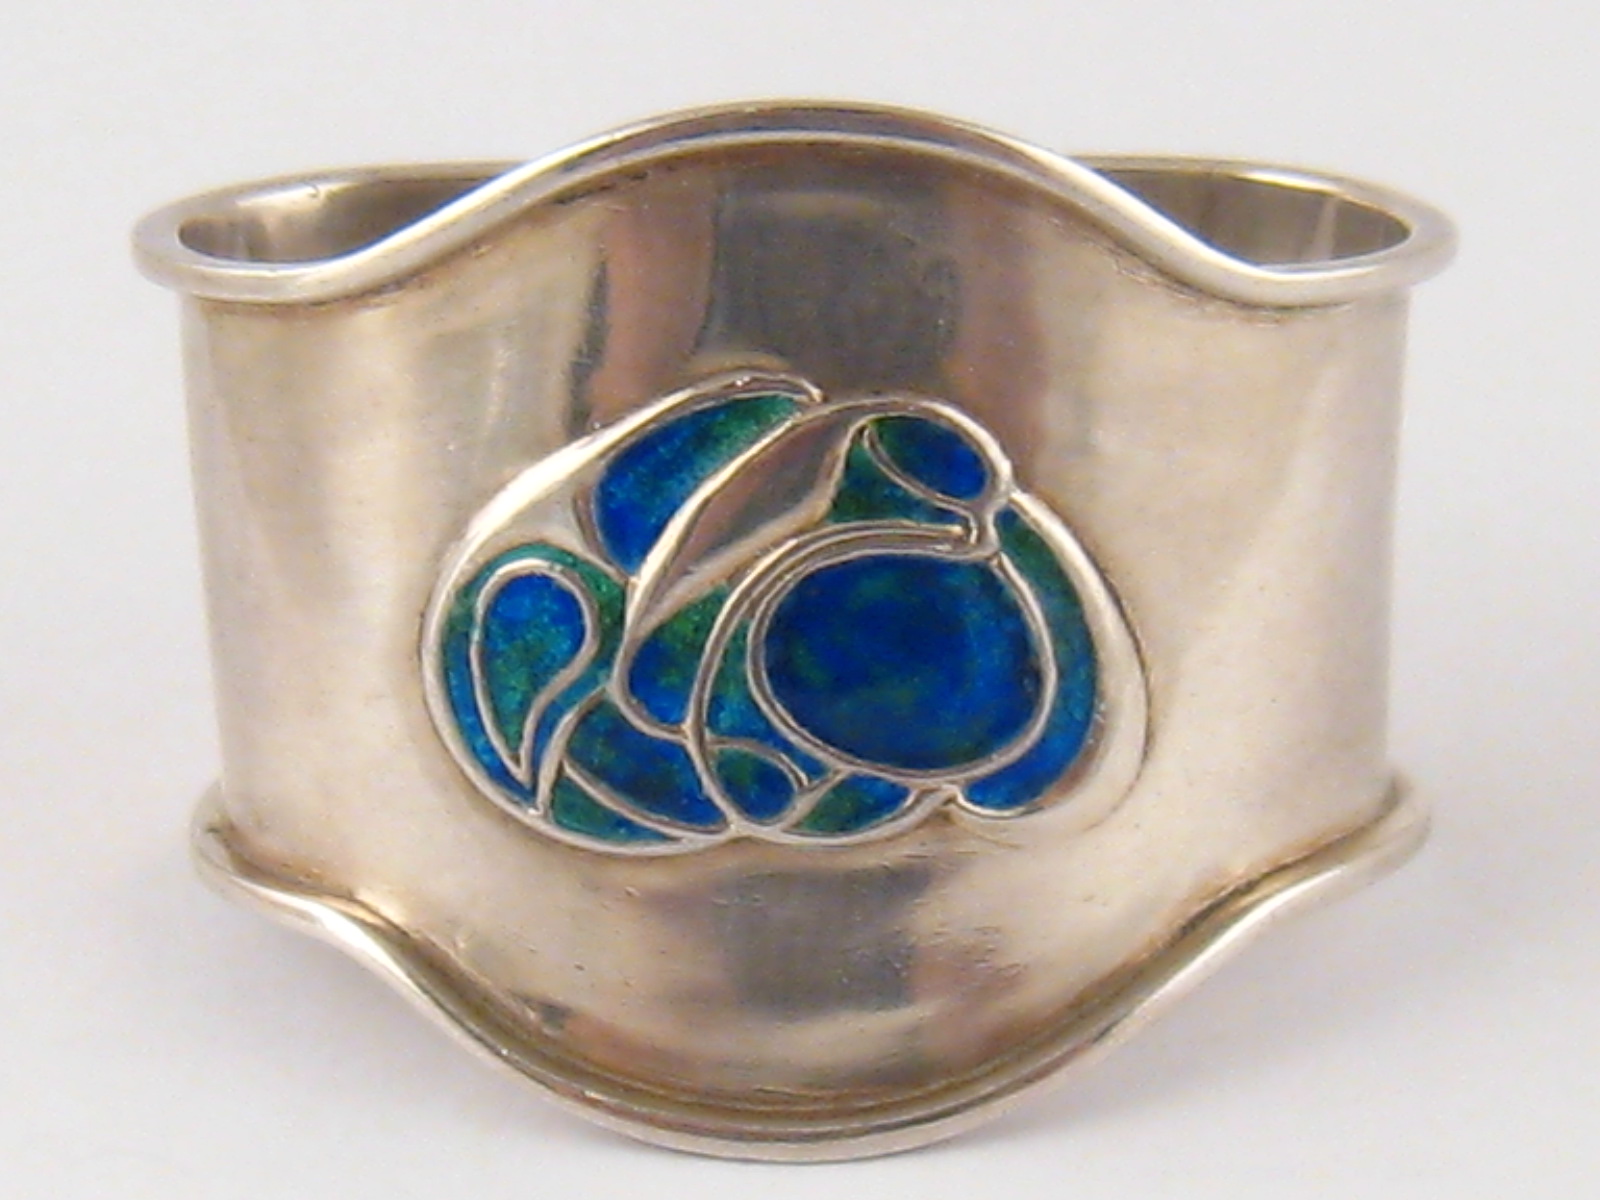 A Liberty &Co. Arts and Crafts silver shaped D napkin ring with shaded turquoise enamel entwined